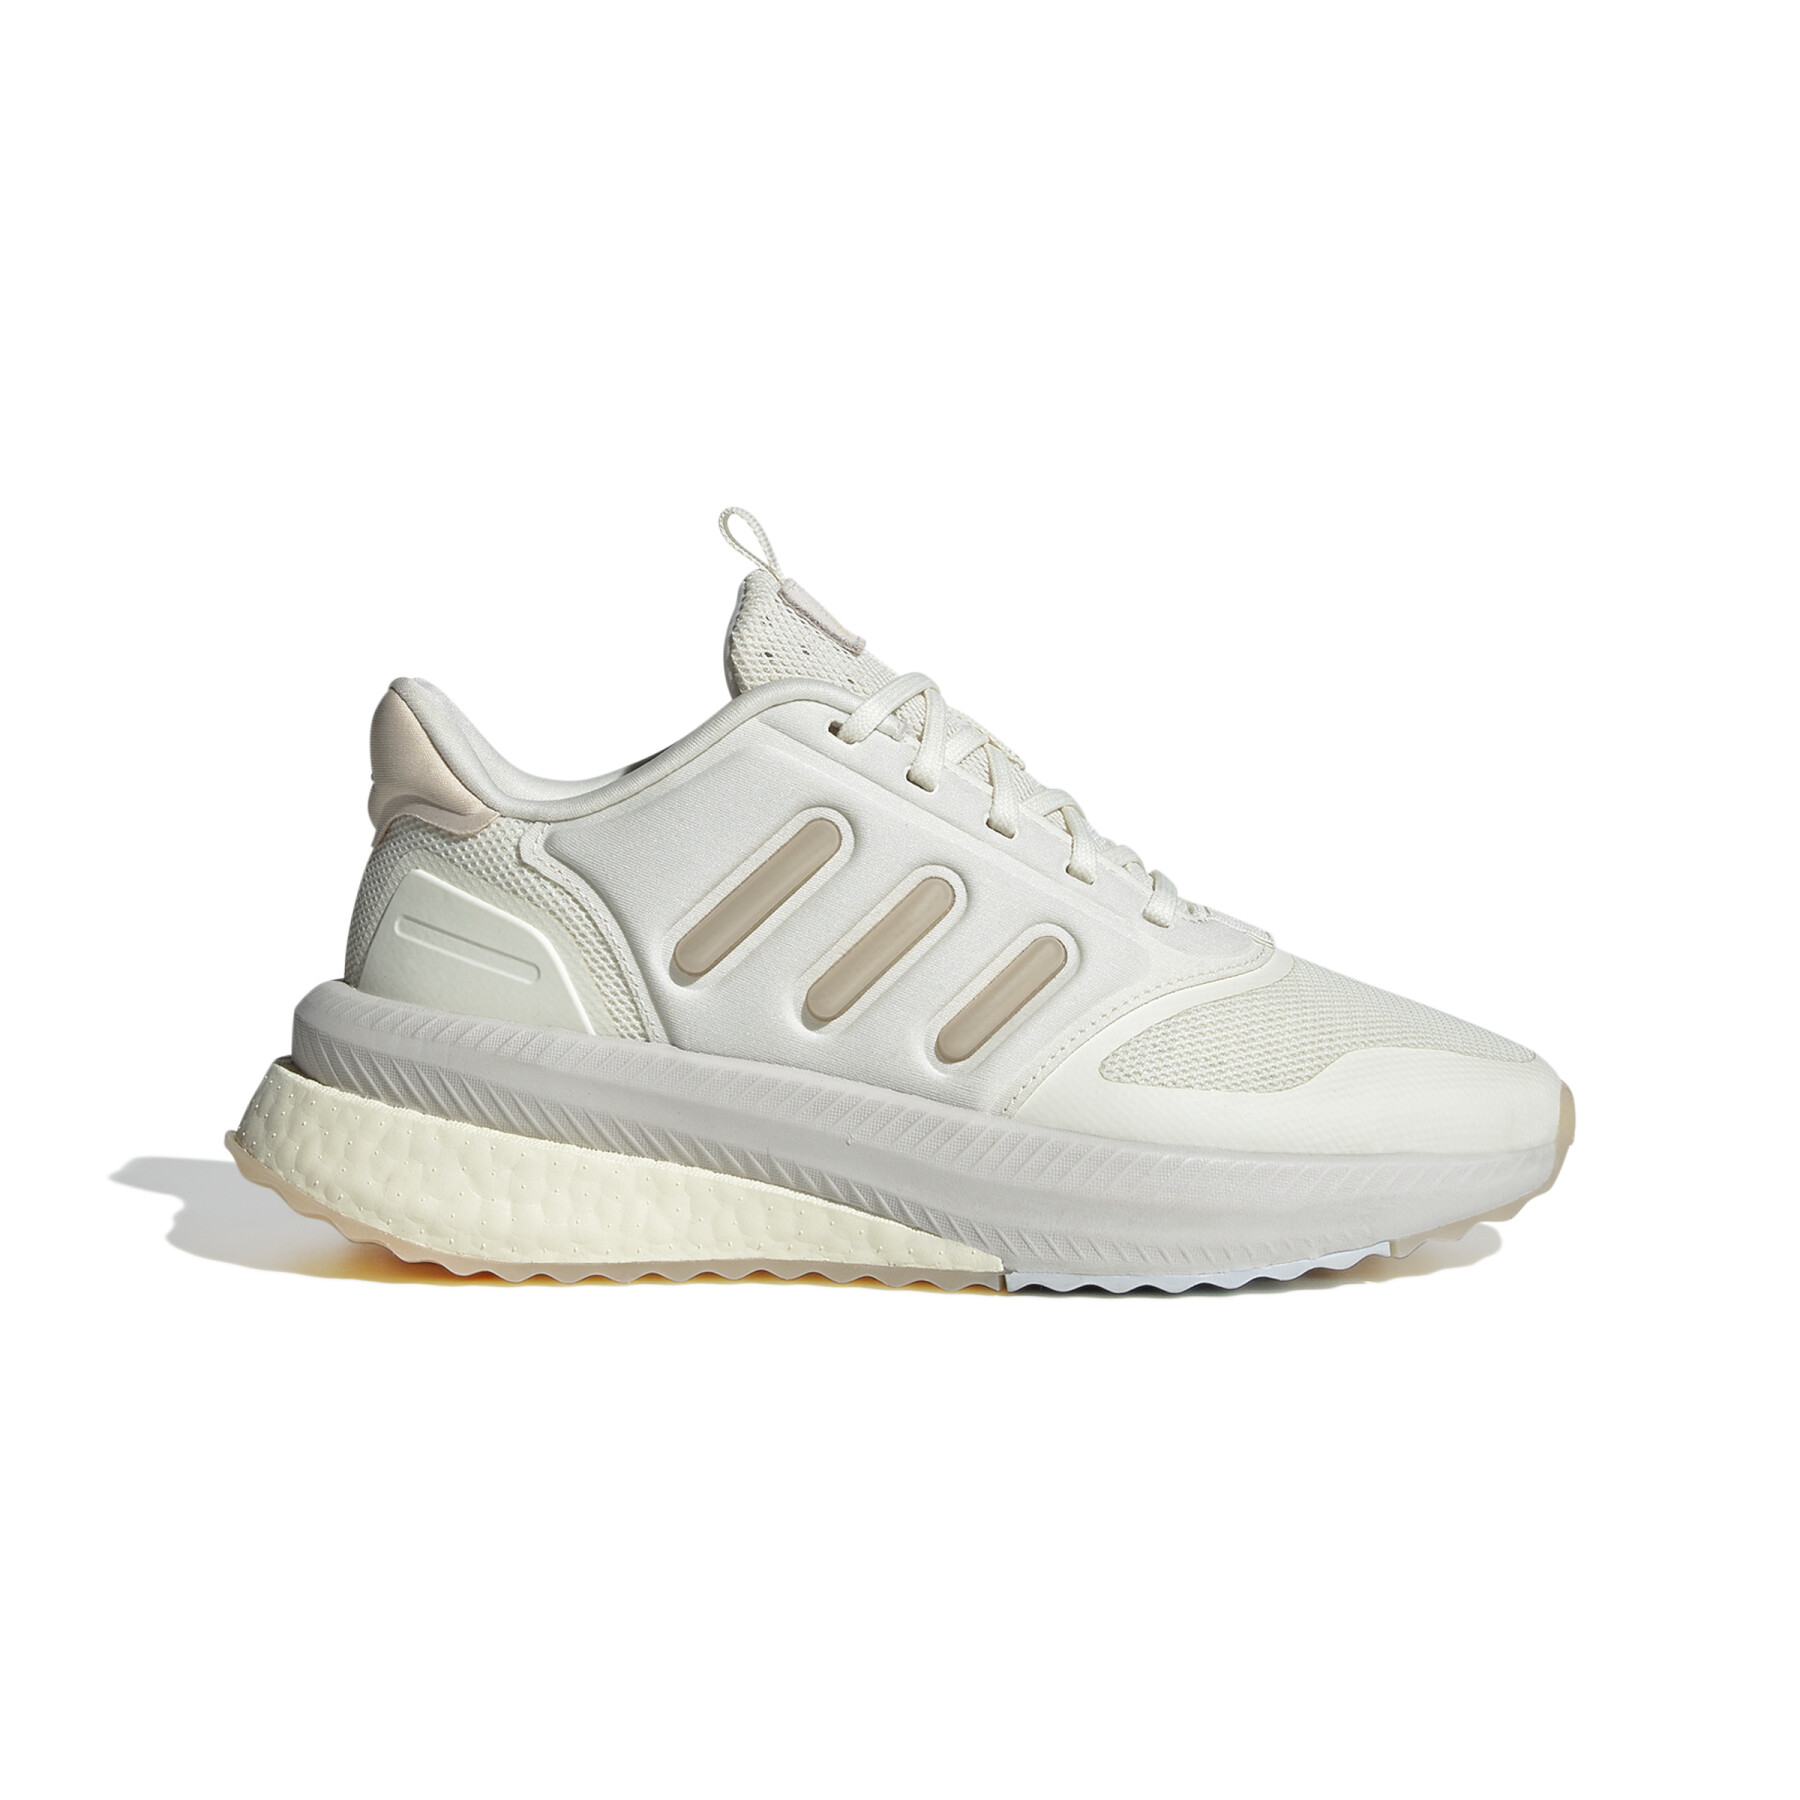 Sneakers adidas X_PLR Phase